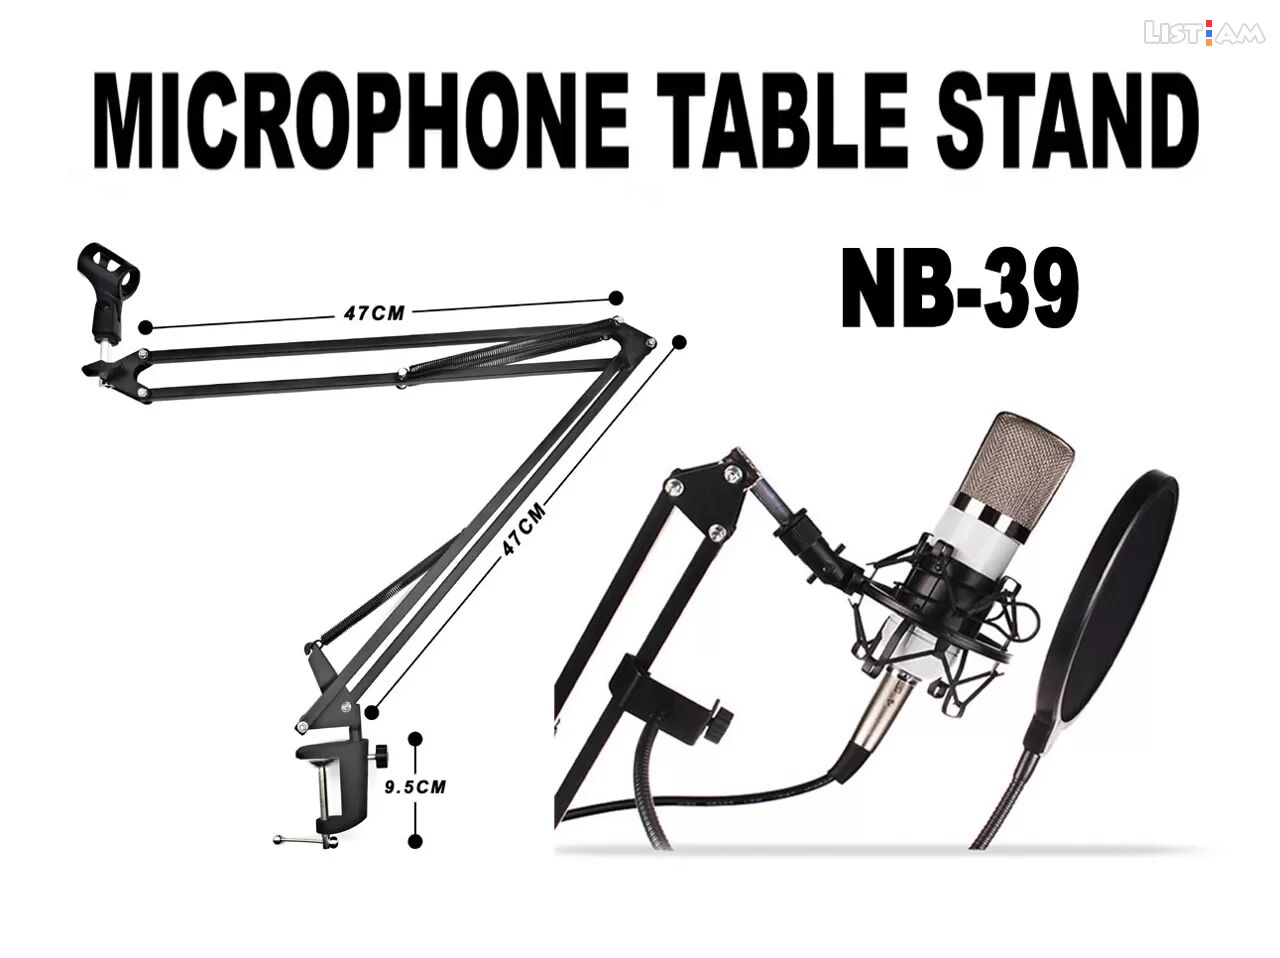 Microphone Table